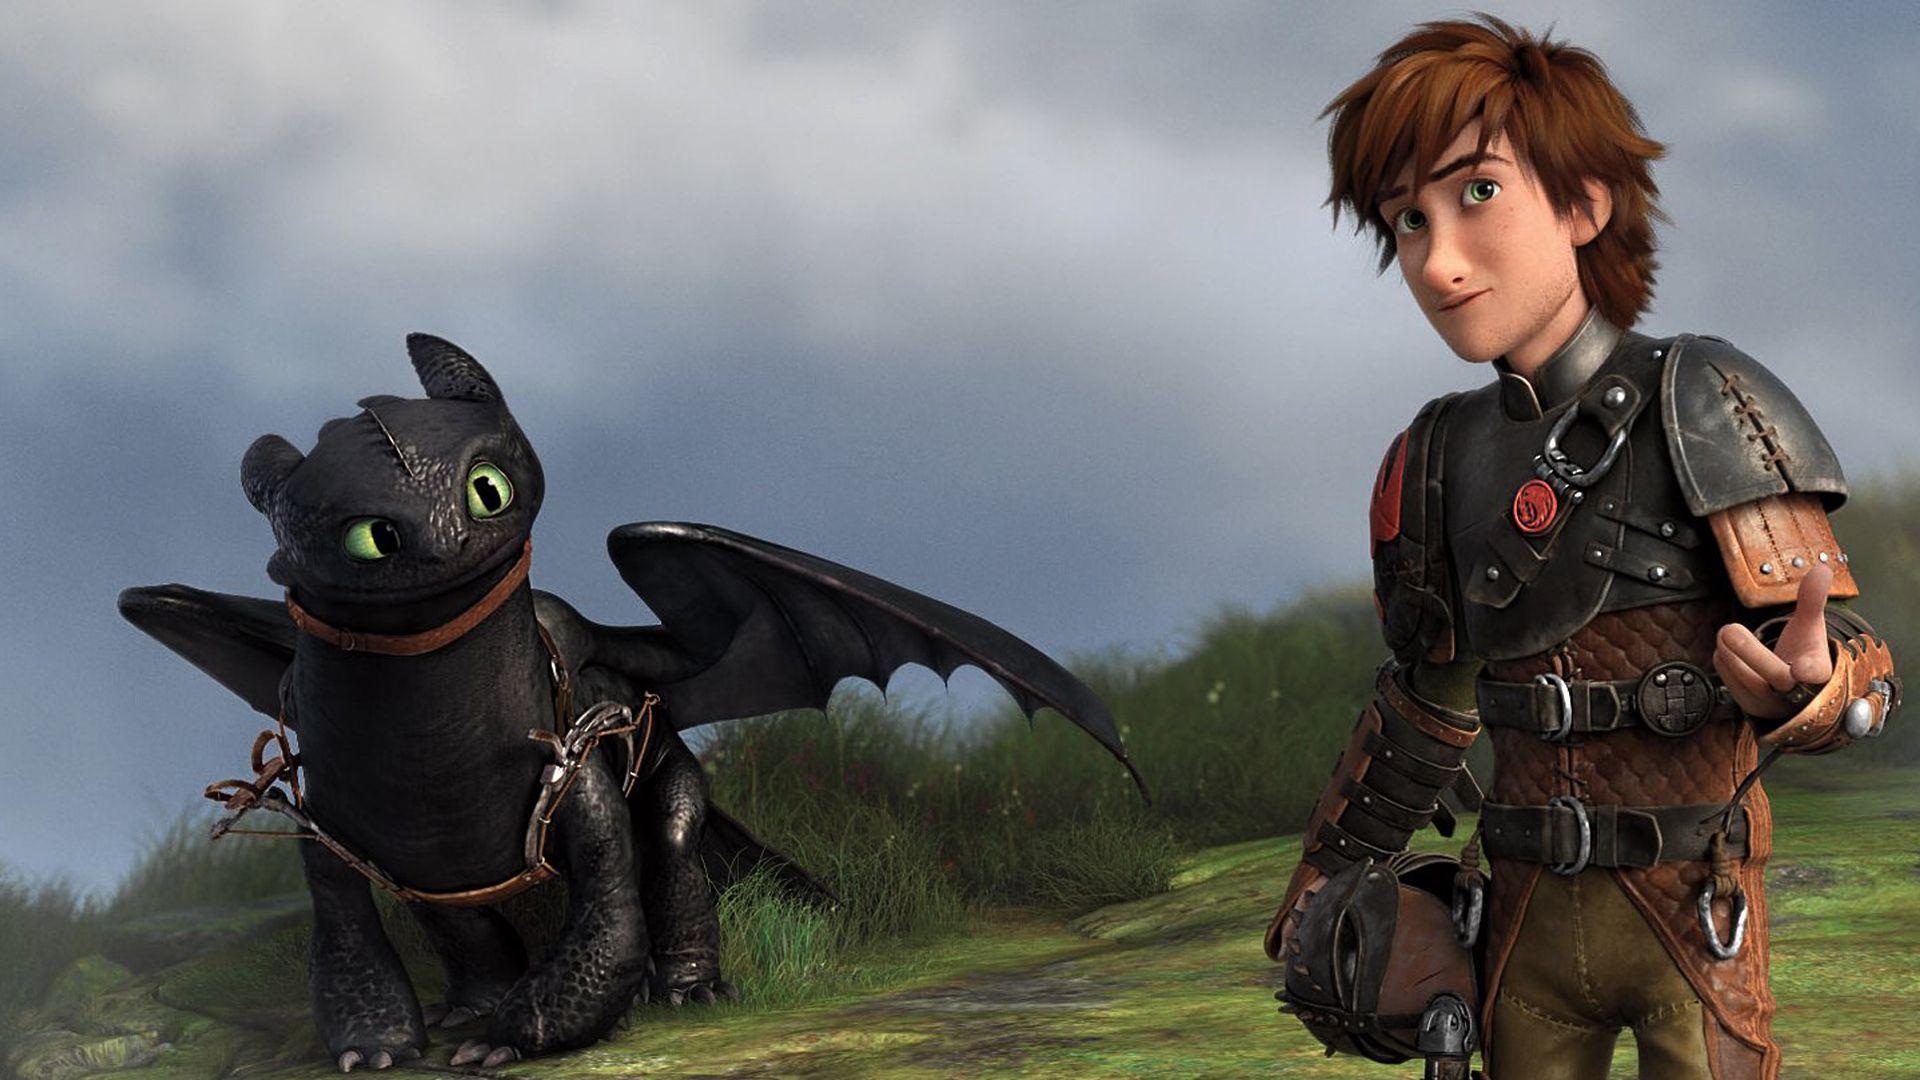 Astrid HD Wallpaper Background 1920×1080 How To Train Your Dragon